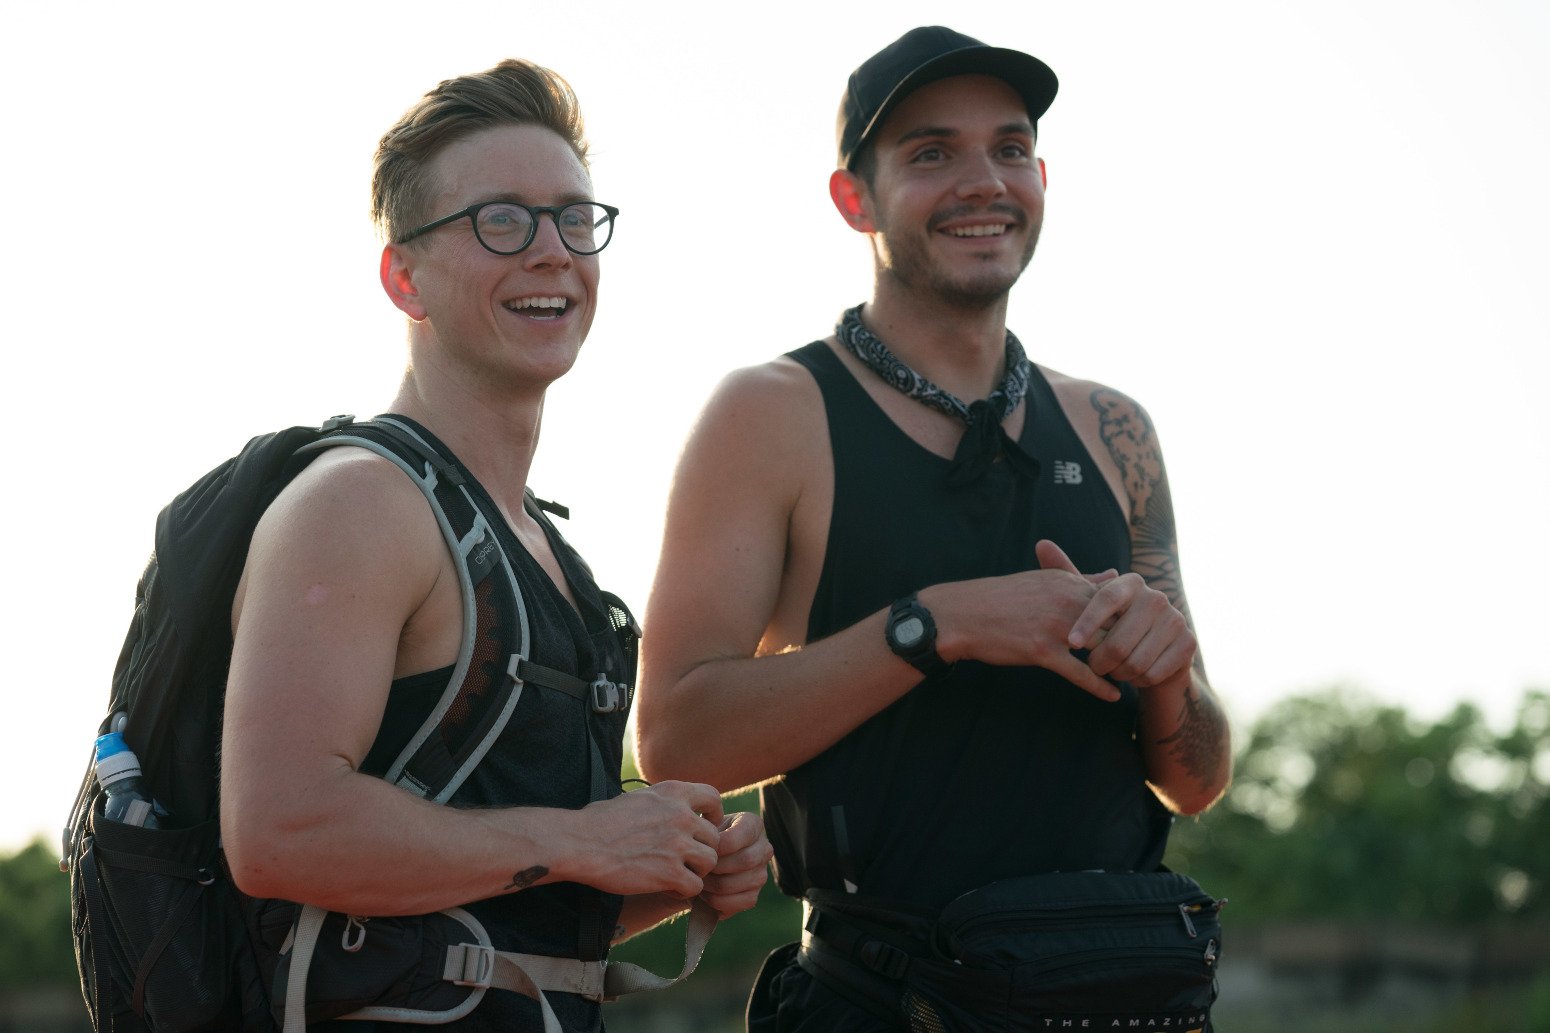 'The Amazing Race' Season 31 runner-ups Tyler Oakley and Korey Kuhl. They're standing next to one another and smiling.